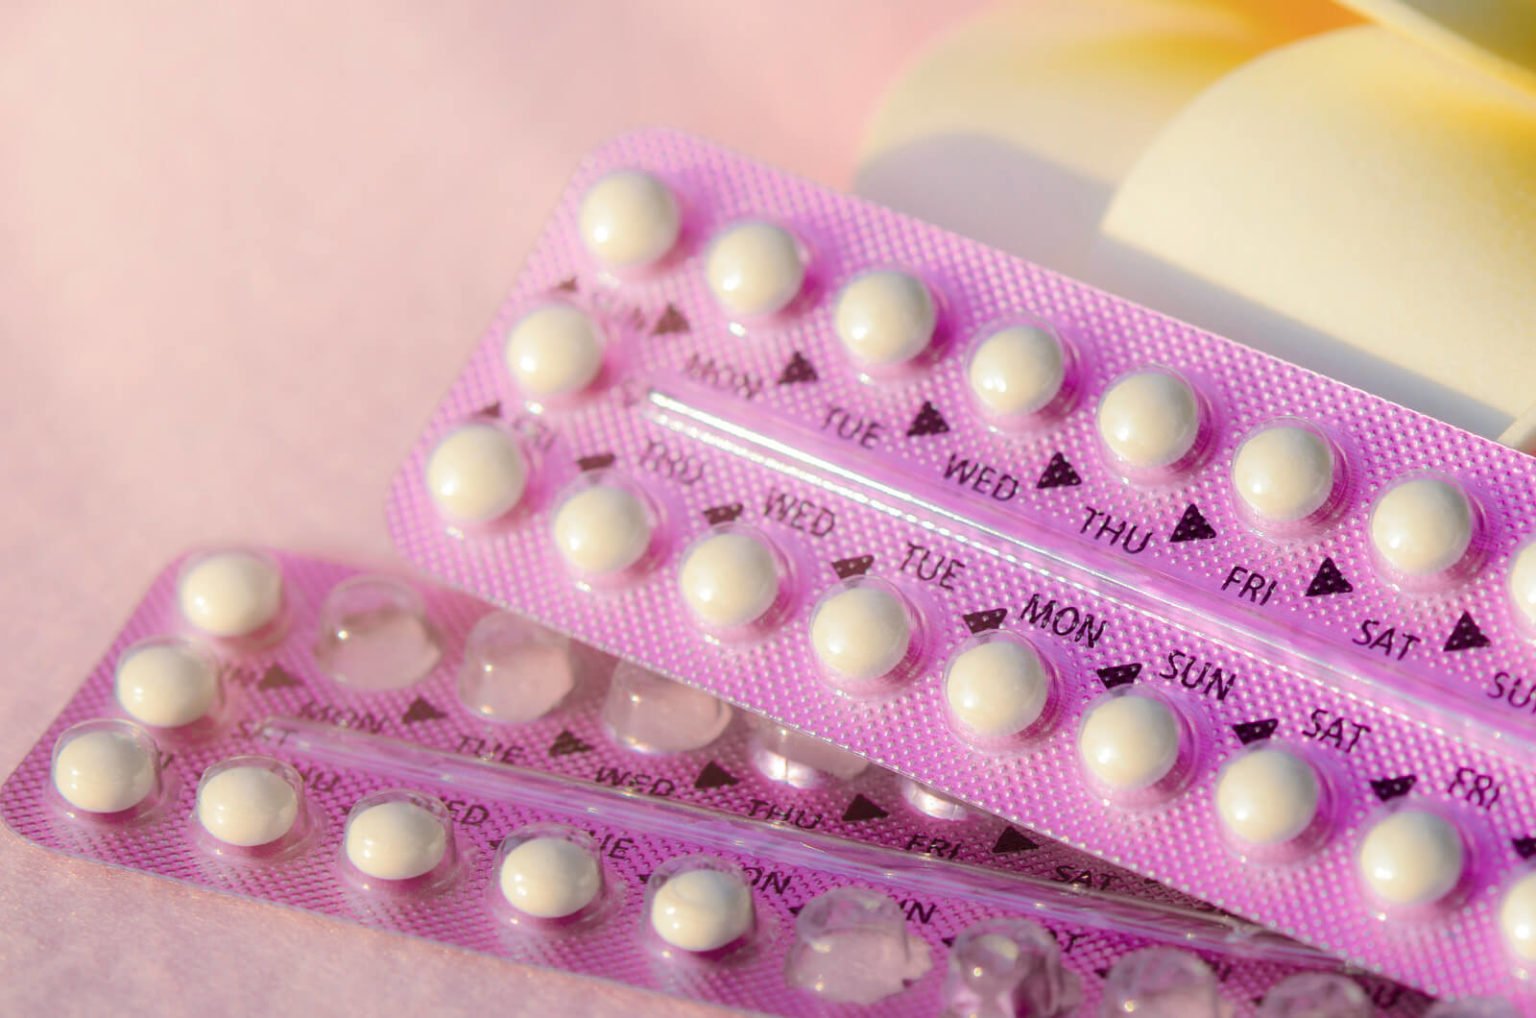 Using Birth Control to Regulate or Skip Your Period